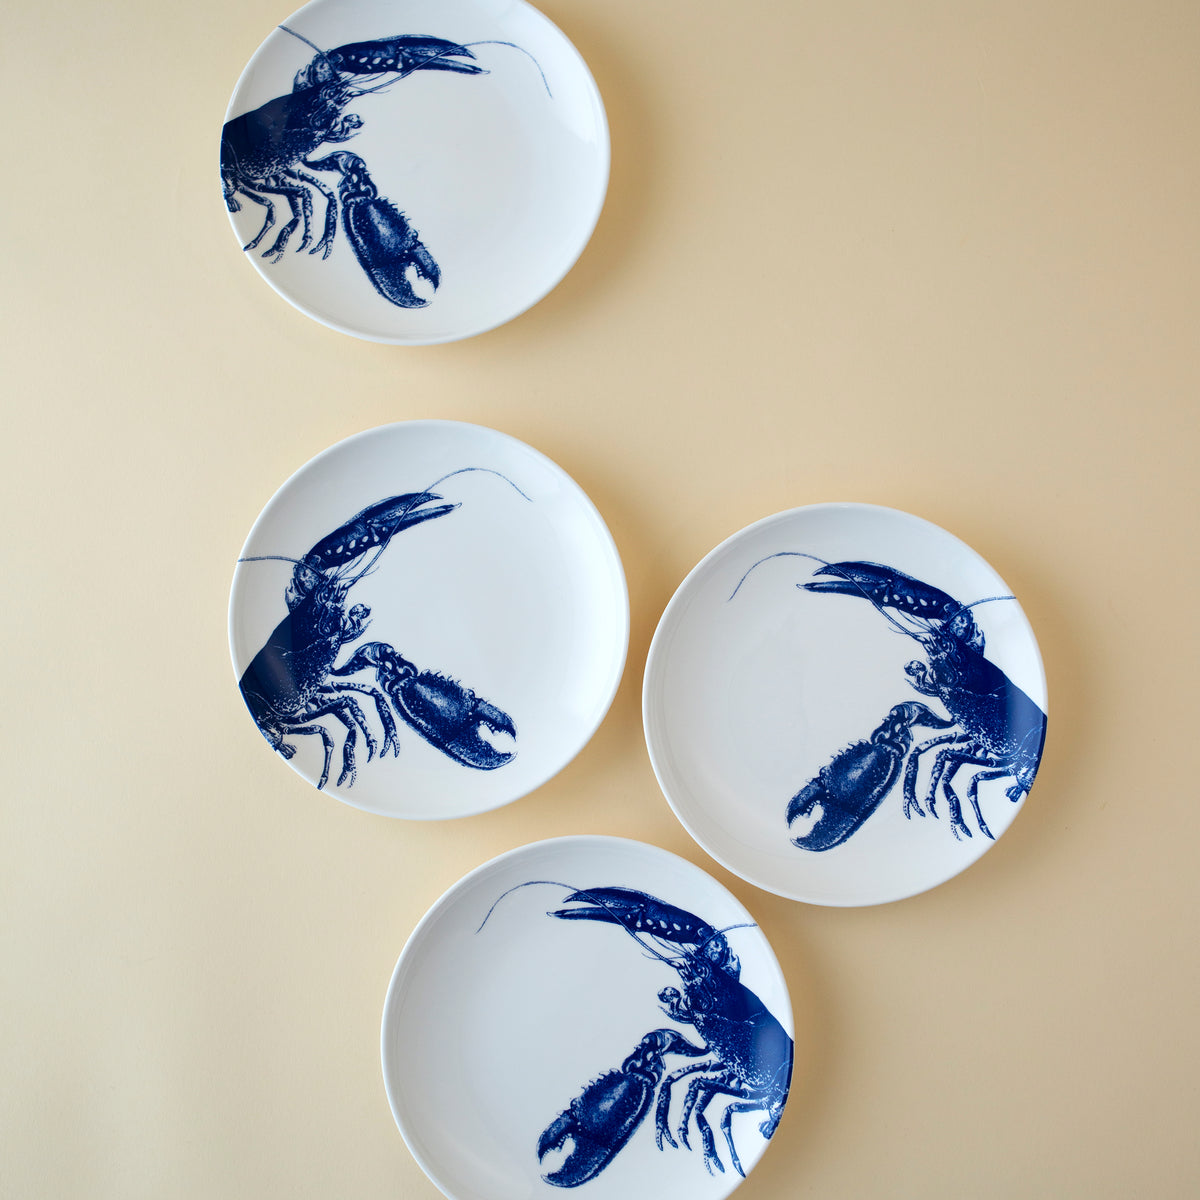 Four small plates with blue lobster designs are arranged in a diagonal line on a beige background, capturing the essence of New England&#39;s coast. These **Lobster Small Plates** from **Caskata Artisanal Home** bring a touch of seaside charm to any setting.